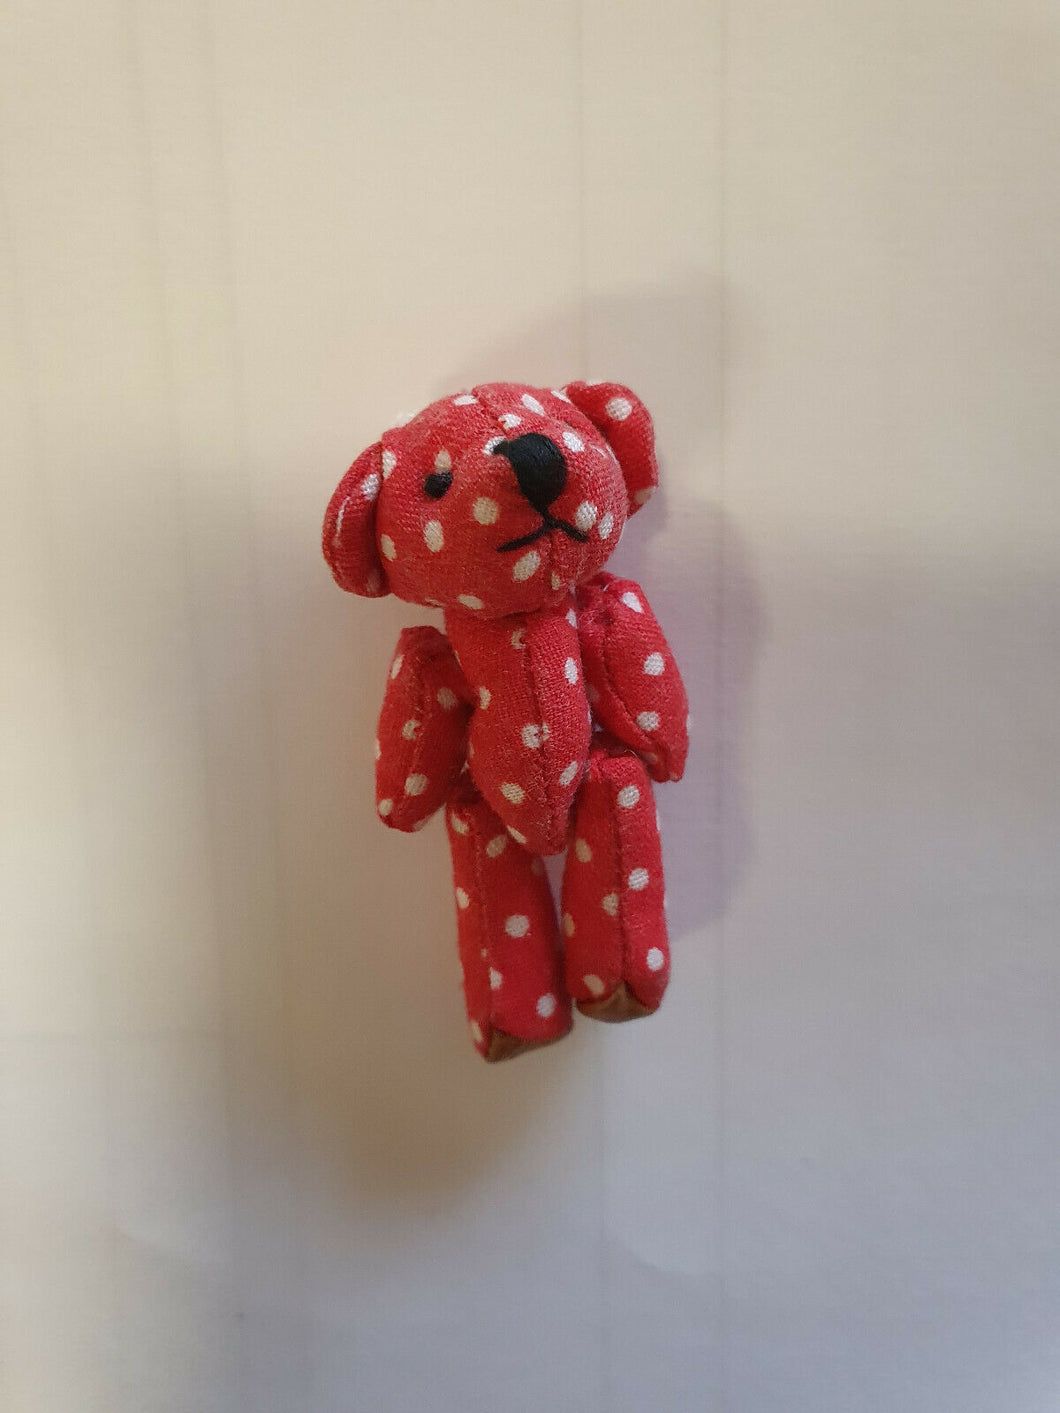 MINIATURE TINY SMALL JOINTED RED SPOTTED POLKA DOTS BEAR 1.5